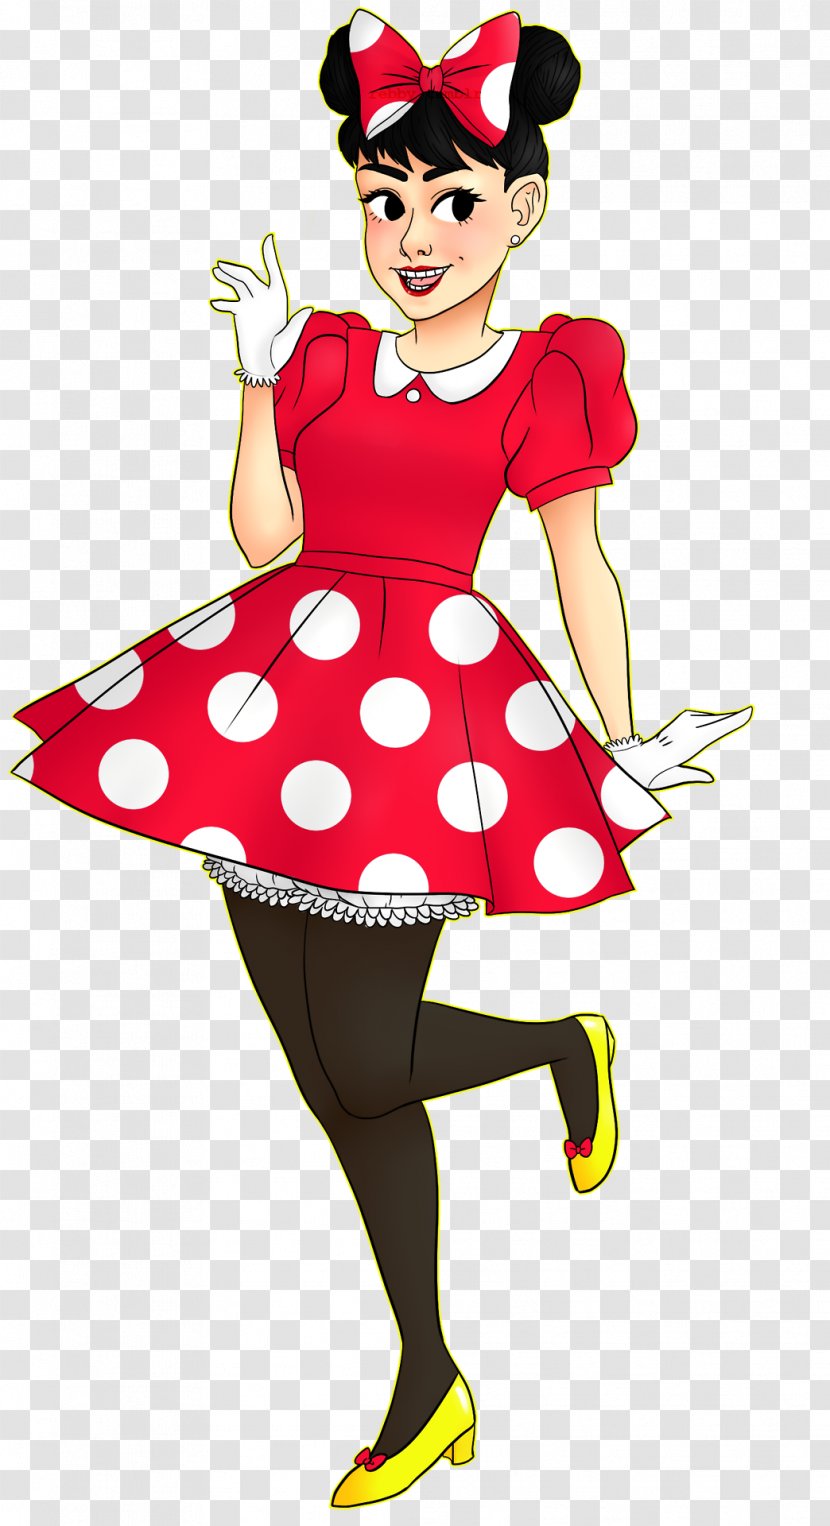 Clothing Costume Design - Cartoon - Minnie Mouse Transparent PNG